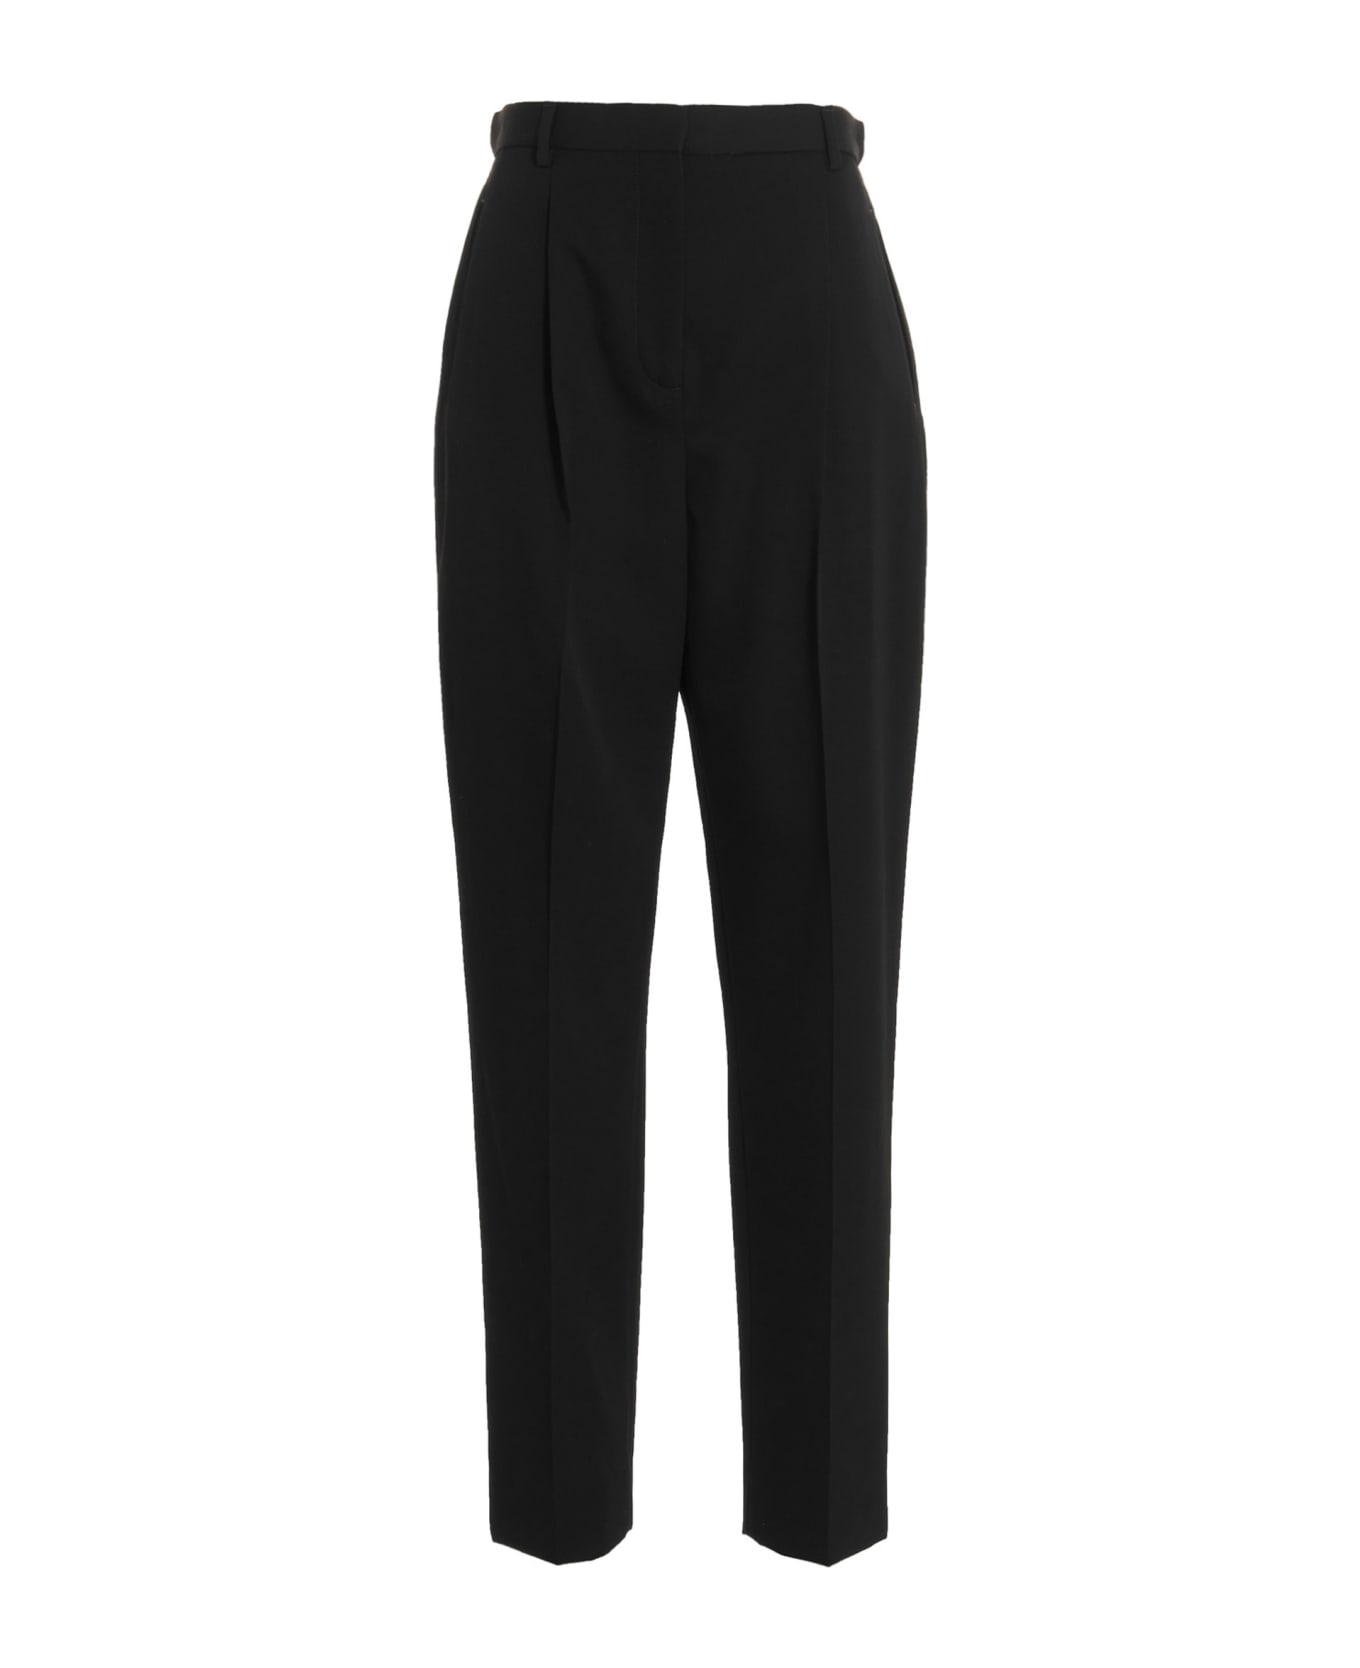 Tory Burch Wool Twilled Tailored Trousers - NERO